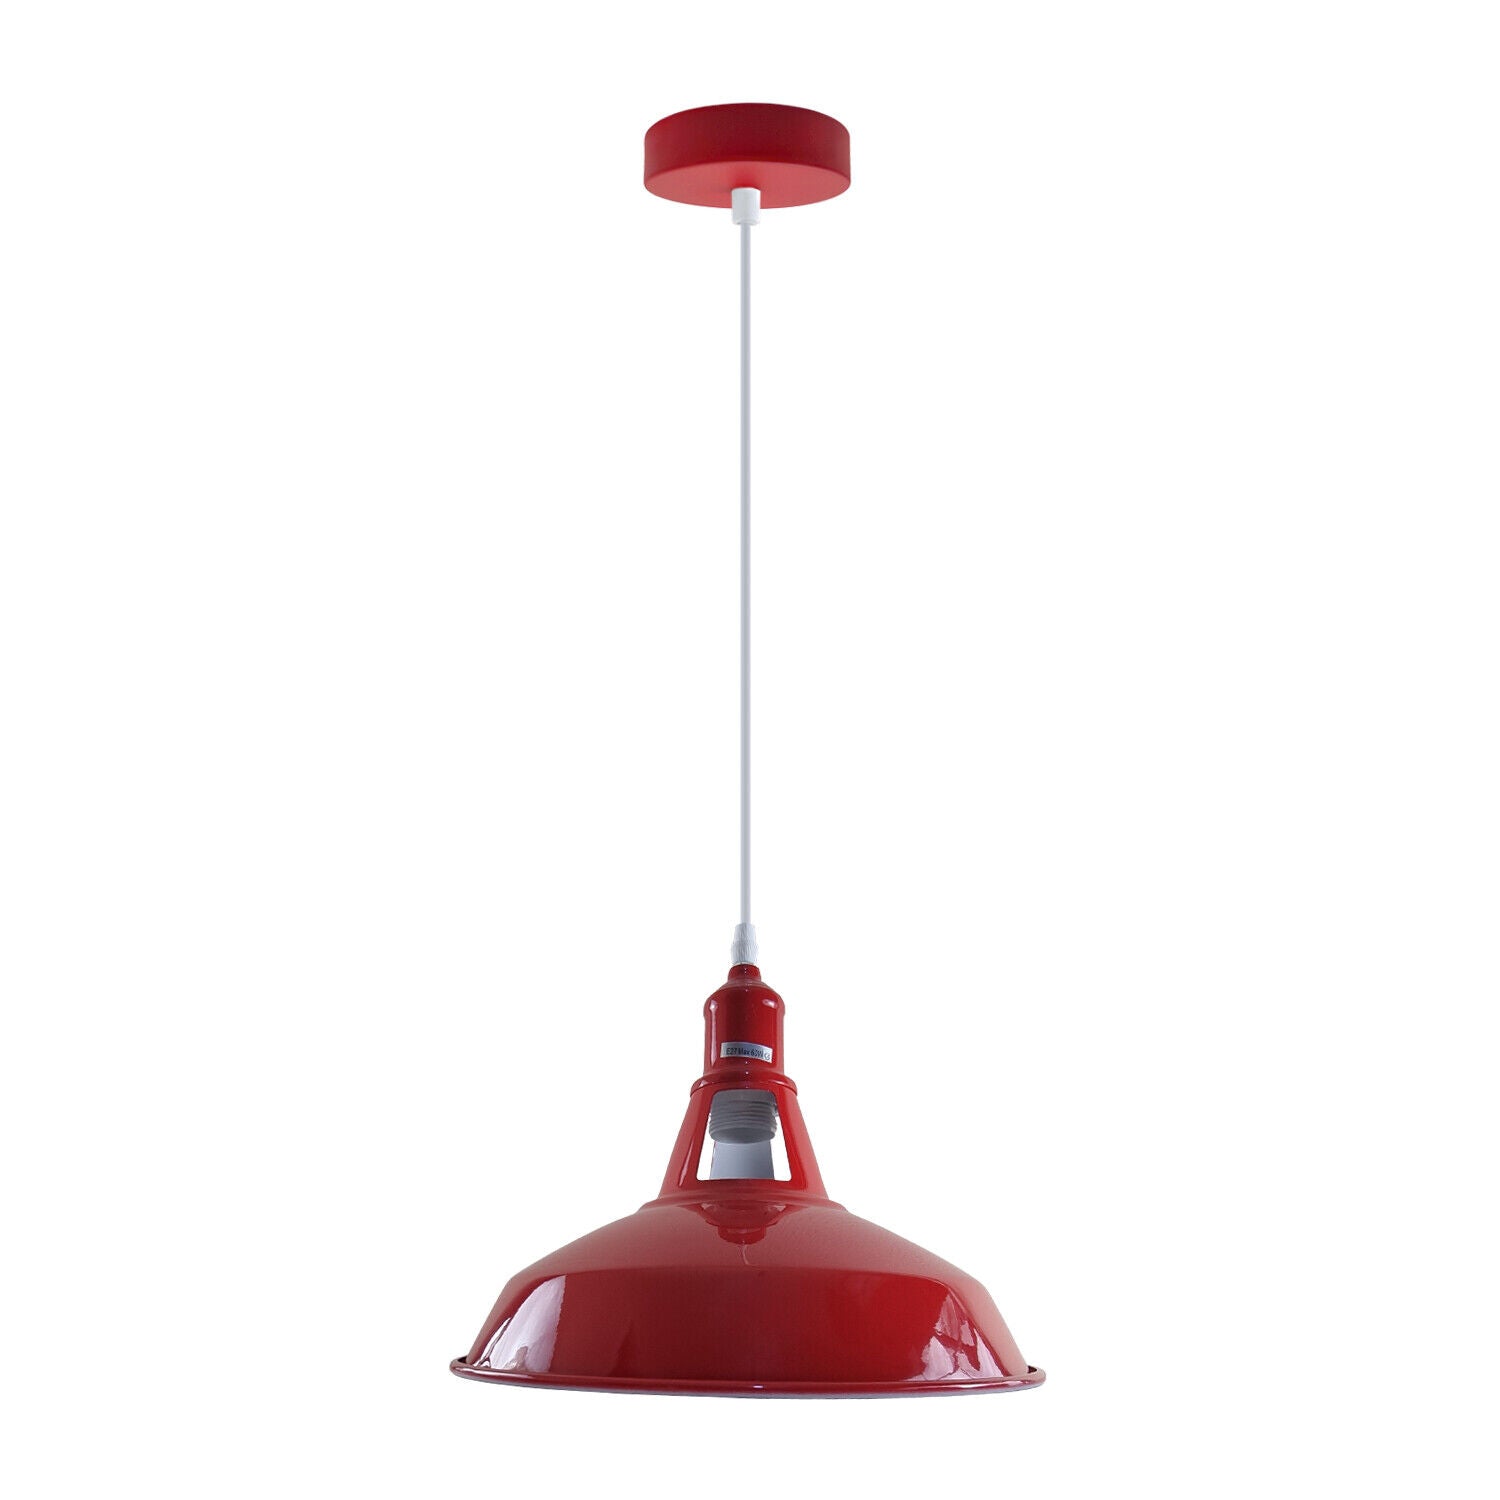 Red pendant light with a shade